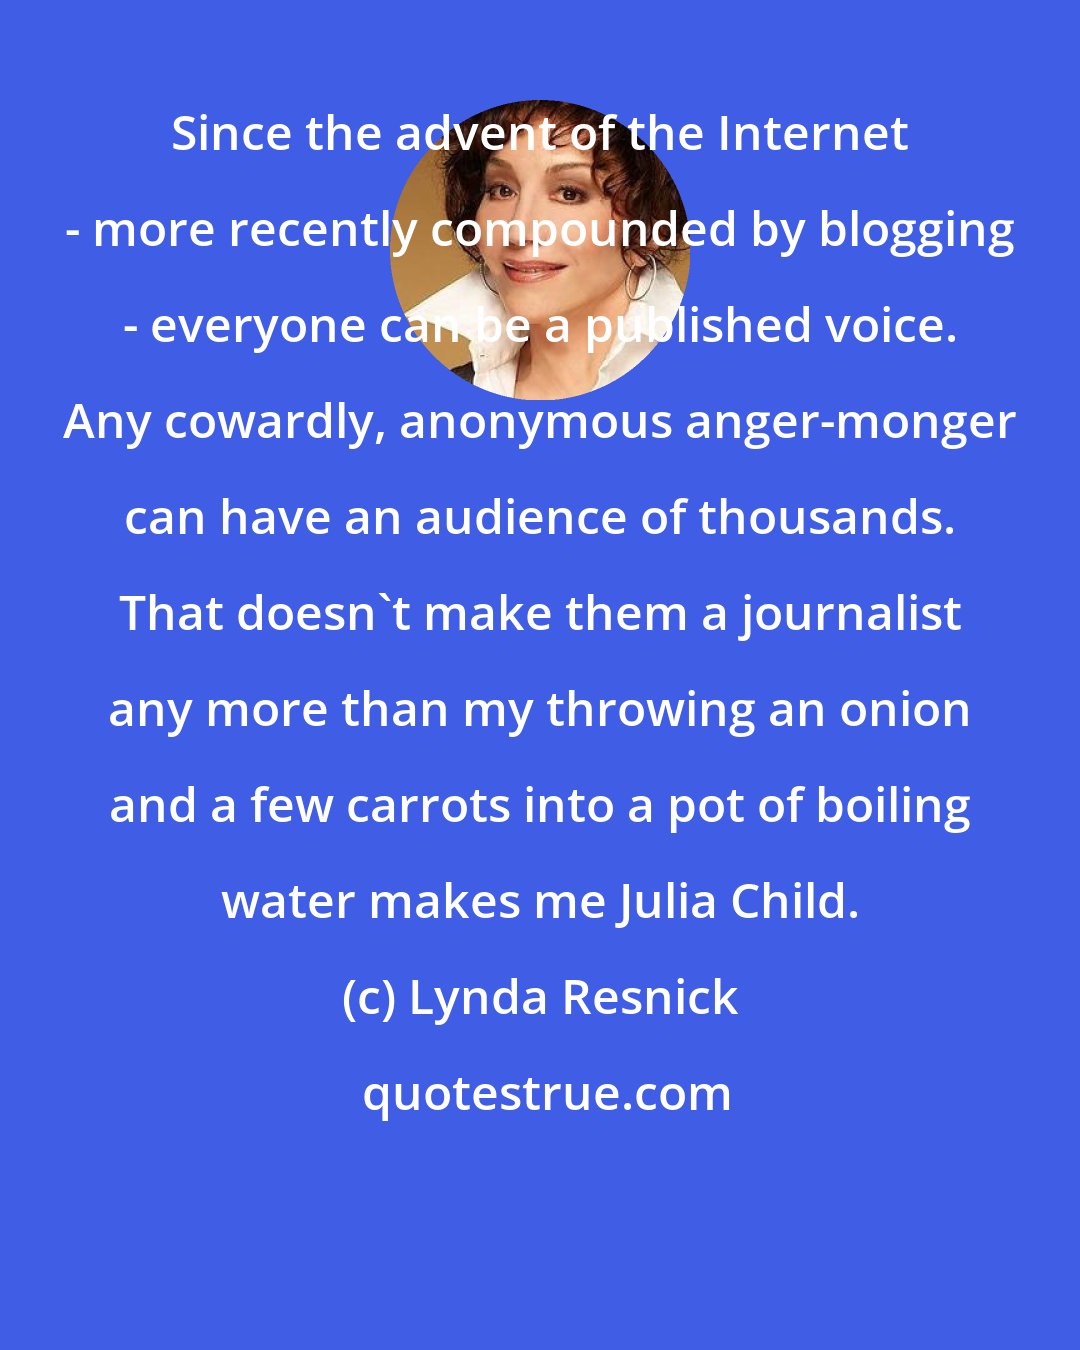 Lynda Resnick: Since the advent of the Internet - more recently compounded by blogging - everyone can be a published voice. Any cowardly, anonymous anger-monger can have an audience of thousands. That doesn't make them a journalist any more than my throwing an onion and a few carrots into a pot of boiling water makes me Julia Child.